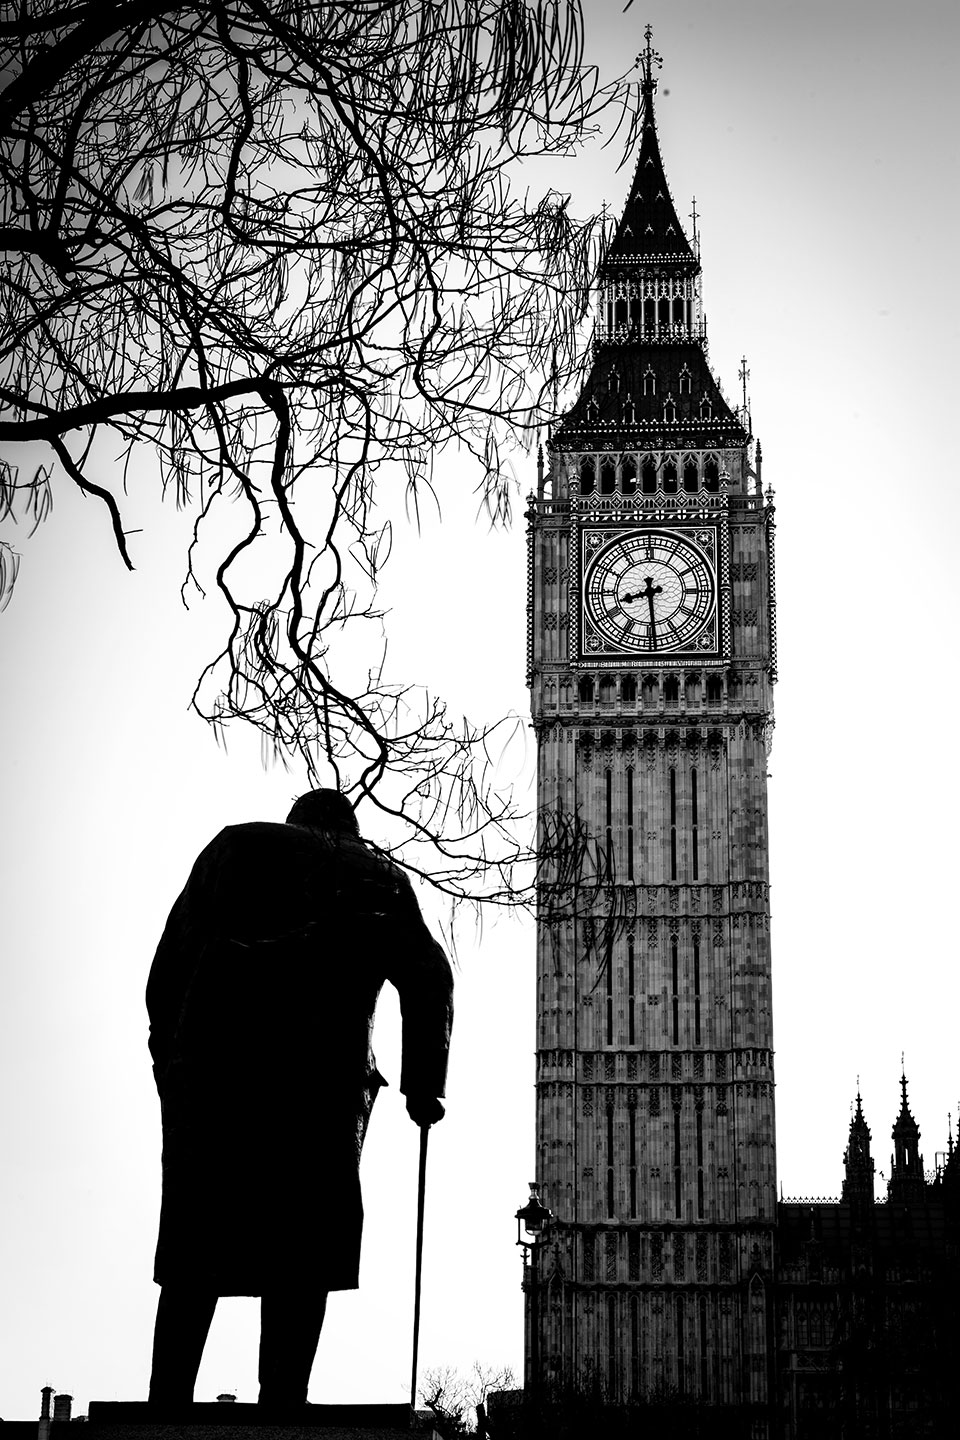 Statue of Winston Churchill facing the Houses of Parliament and Big Ben. 